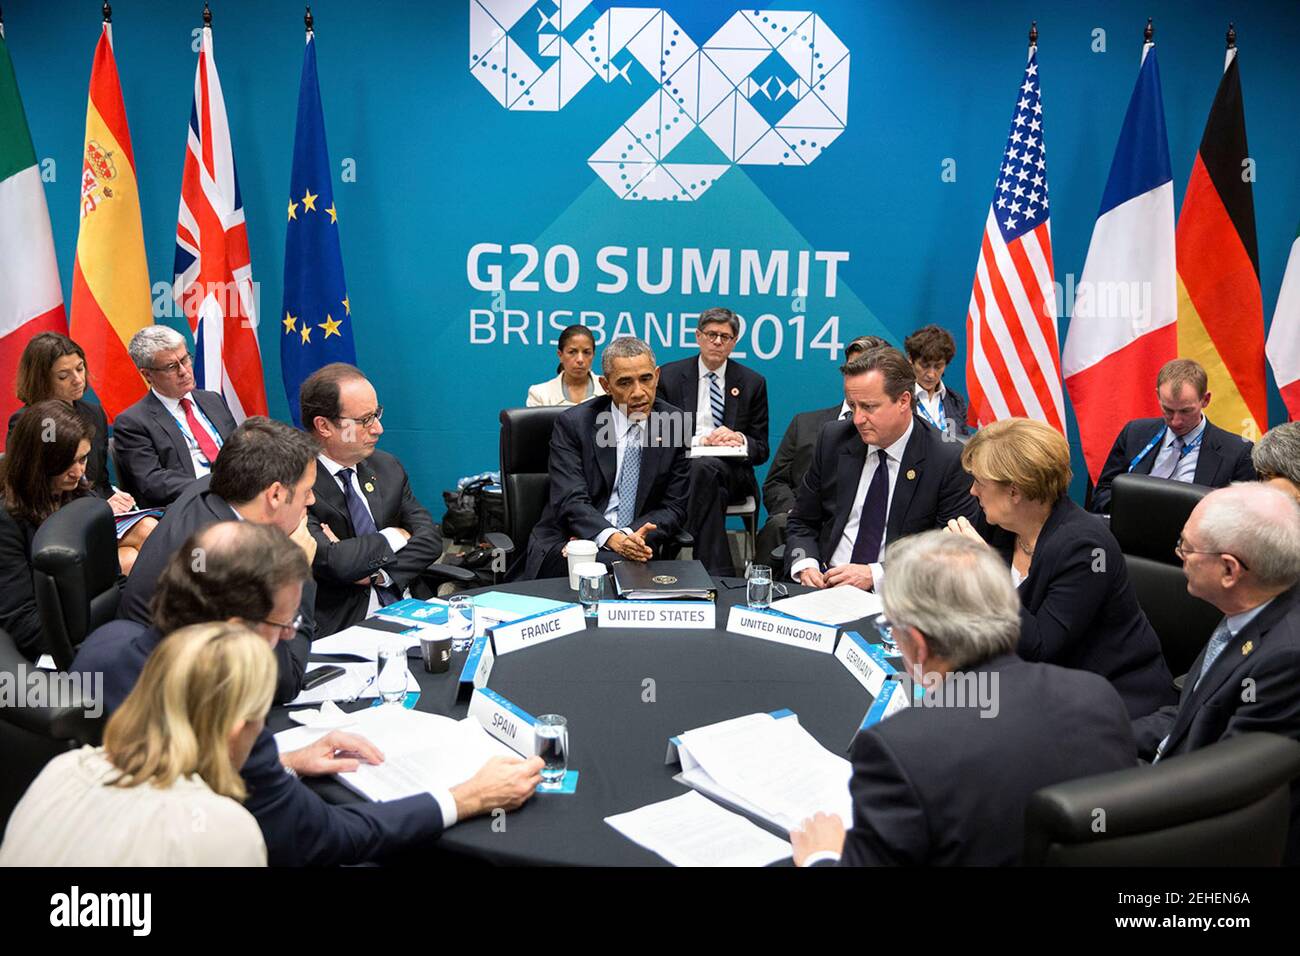 President Barack Obama attends the G20 European Leaders Meeting on the Transatlantic Trade and Investment Partnership and Ukraine at the Brisbane Convention and Exhibition Center, Brisbane, Queensland, Australia, Nov. 16, 2014. Seated clockwise from the President are: Prime Minister David Cameron of the United Kingdom; Chancellor Angela Merkel of Germany; Herman Van Rompuy, President of the European Council;  Jean-Claude Juncker, President of the European Commission; Prime Minister Mariano Rajoy Brey of Spain; Prime Minister Matteo Renzi of Italy and President François Hollande of France. Stock Photo